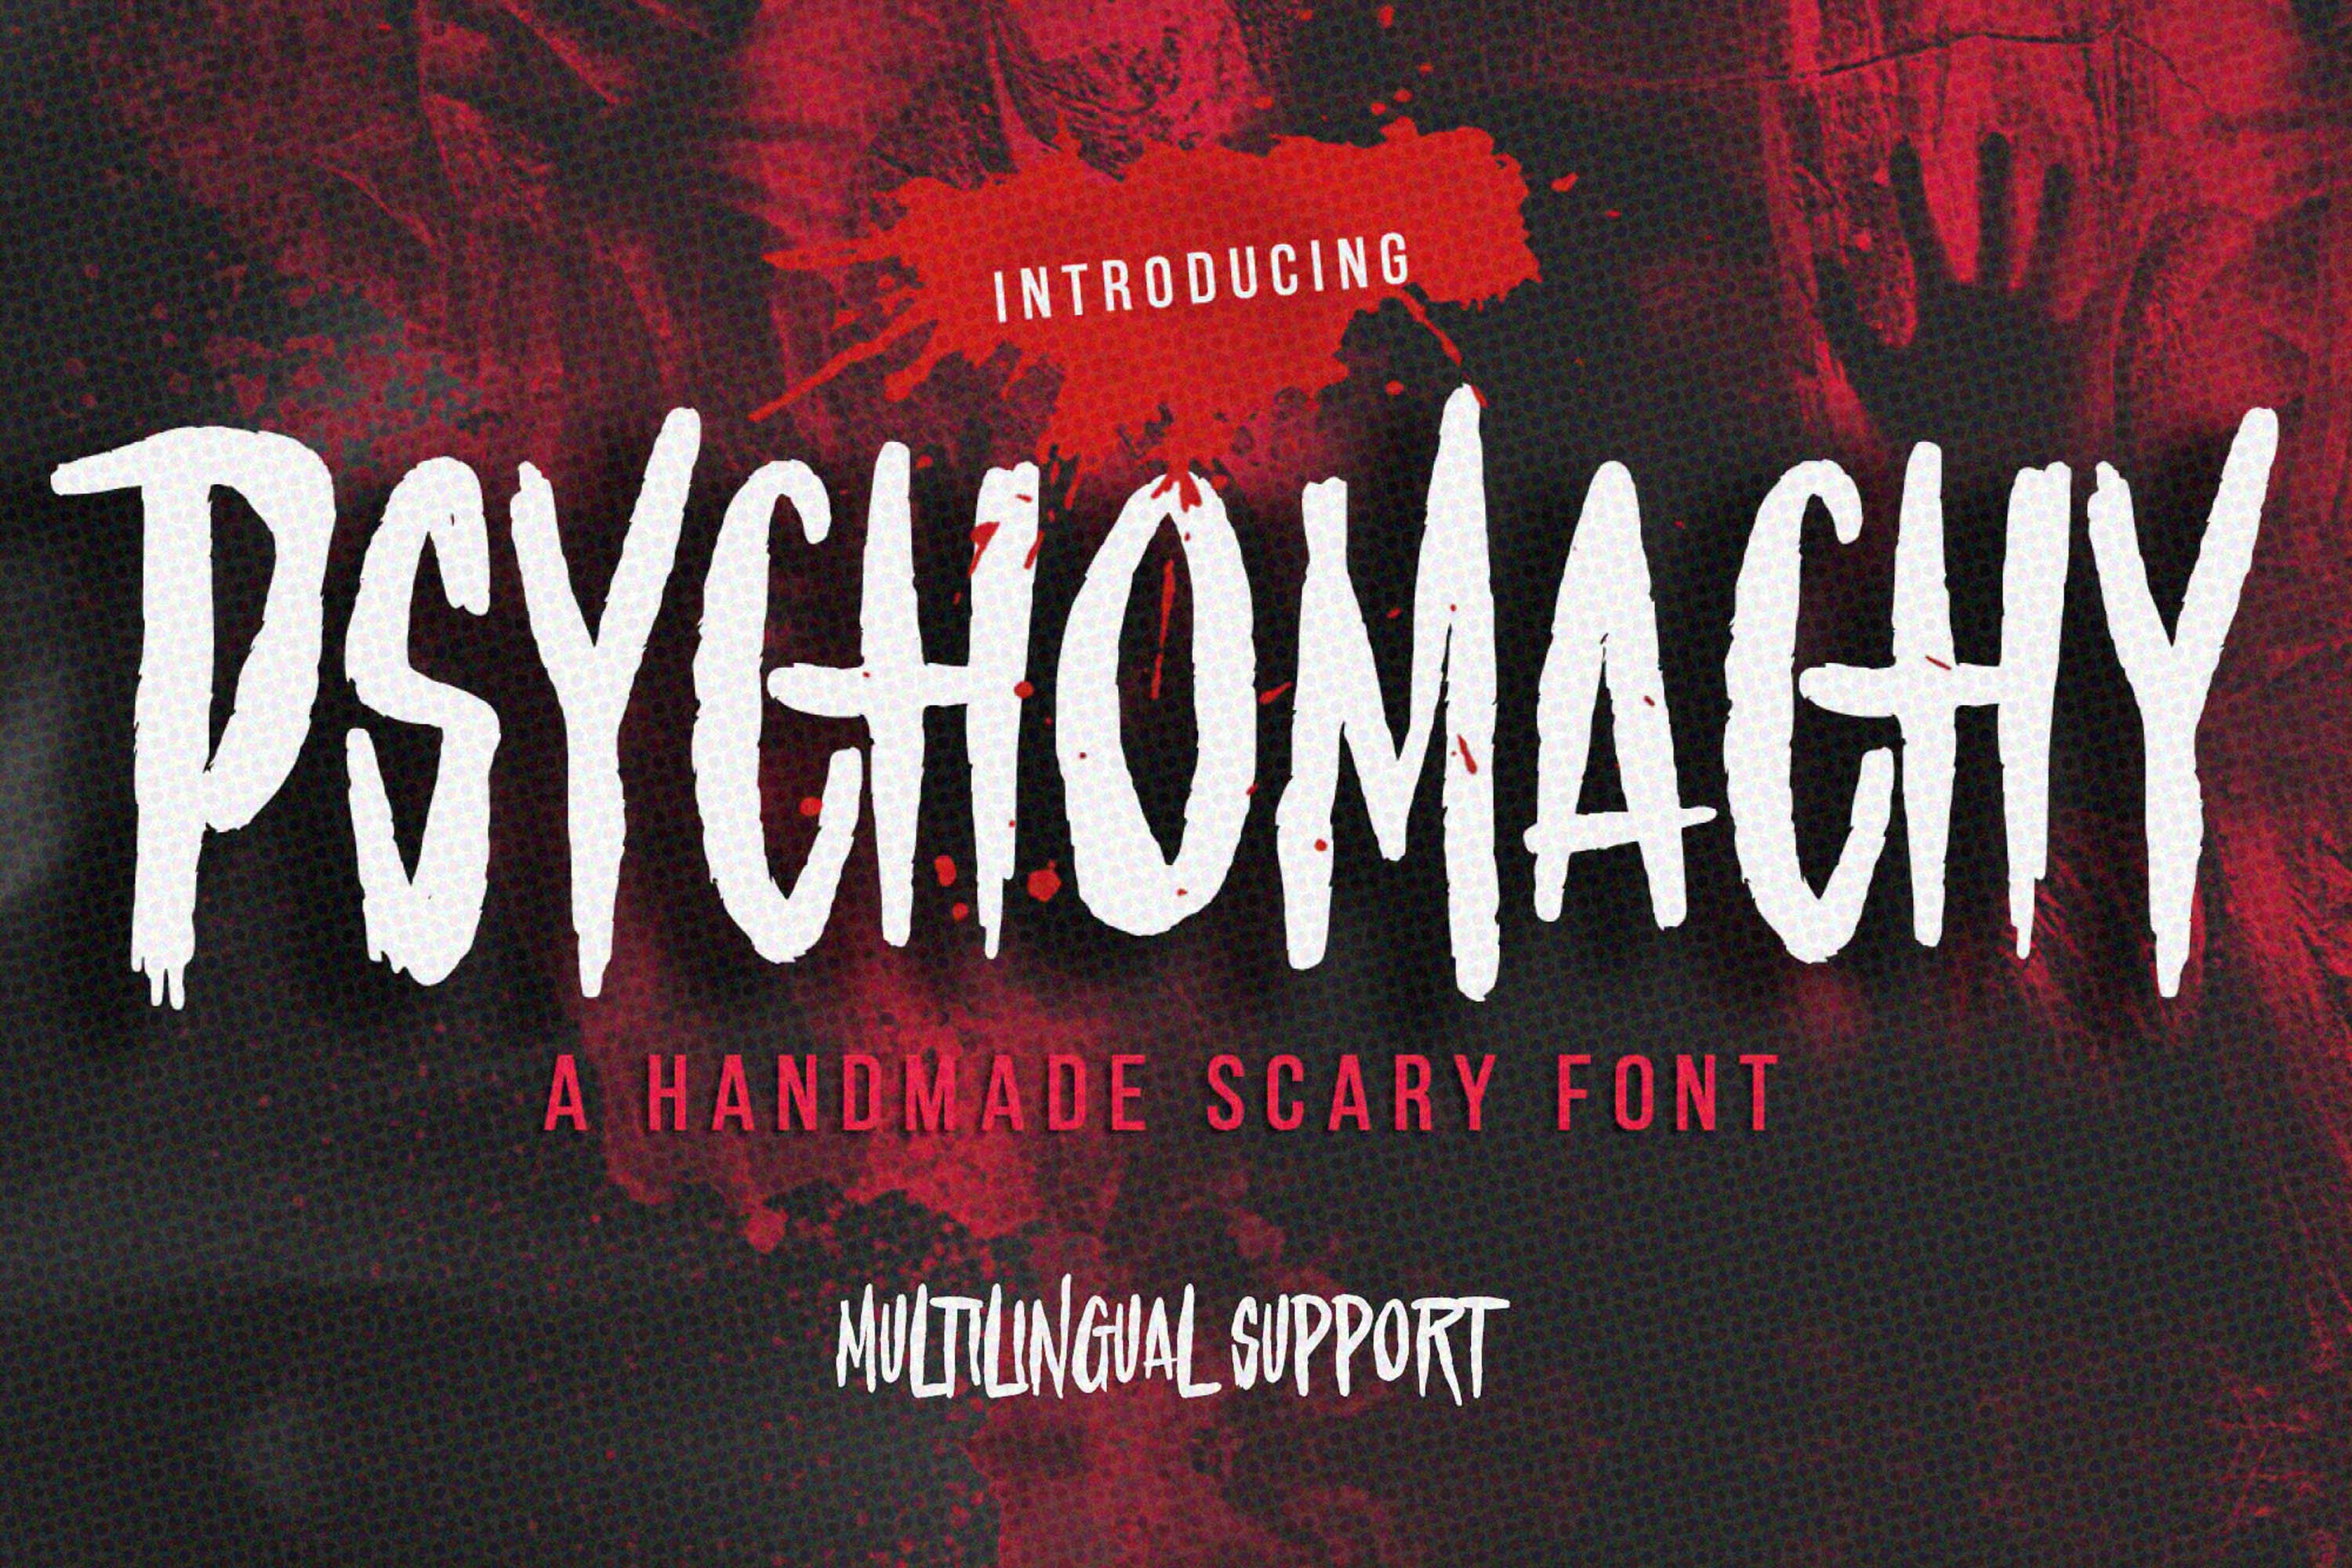 Psychomachy - Handmade Scary Font cover image.